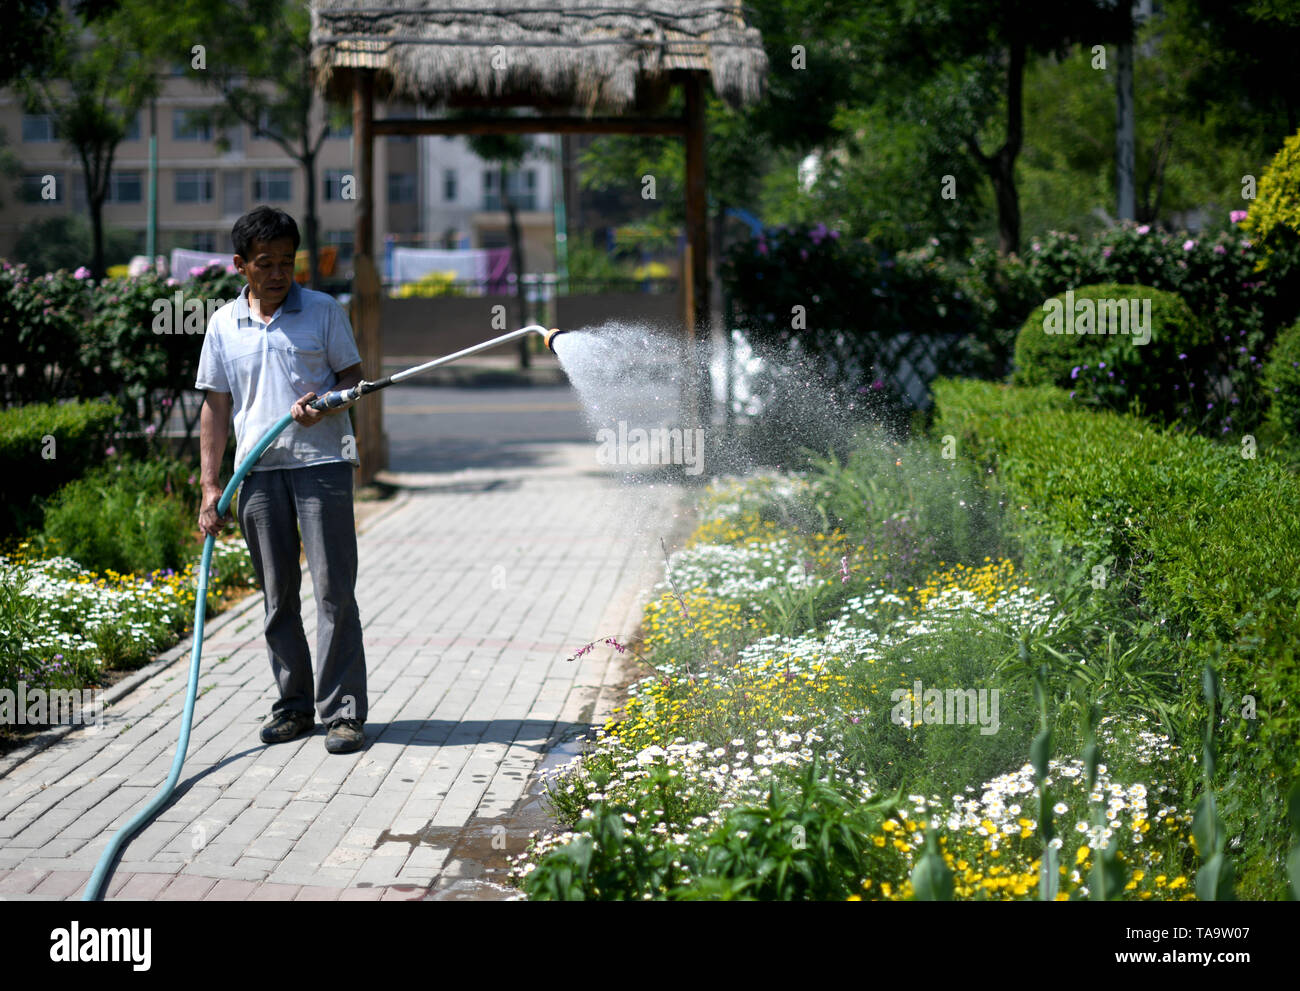 Tianjin. 23rd May, 2019. A staff member waters flowers in a botanical garden in north China's Tianjin Economic-Technological Development Area (TEDA), May 23, 2019. Nearly ten years of greening efforts have successfully transformed a saline-alkaline marsh into a botanical garden with over 6,000 species of plants. The garden now serves as a plant resource bank in TEDA for scientific research, scientific education, demonstration and entertainment purposes. Credit: Yue Yuewei/Xinhua/Alamy Live News Stock Photo